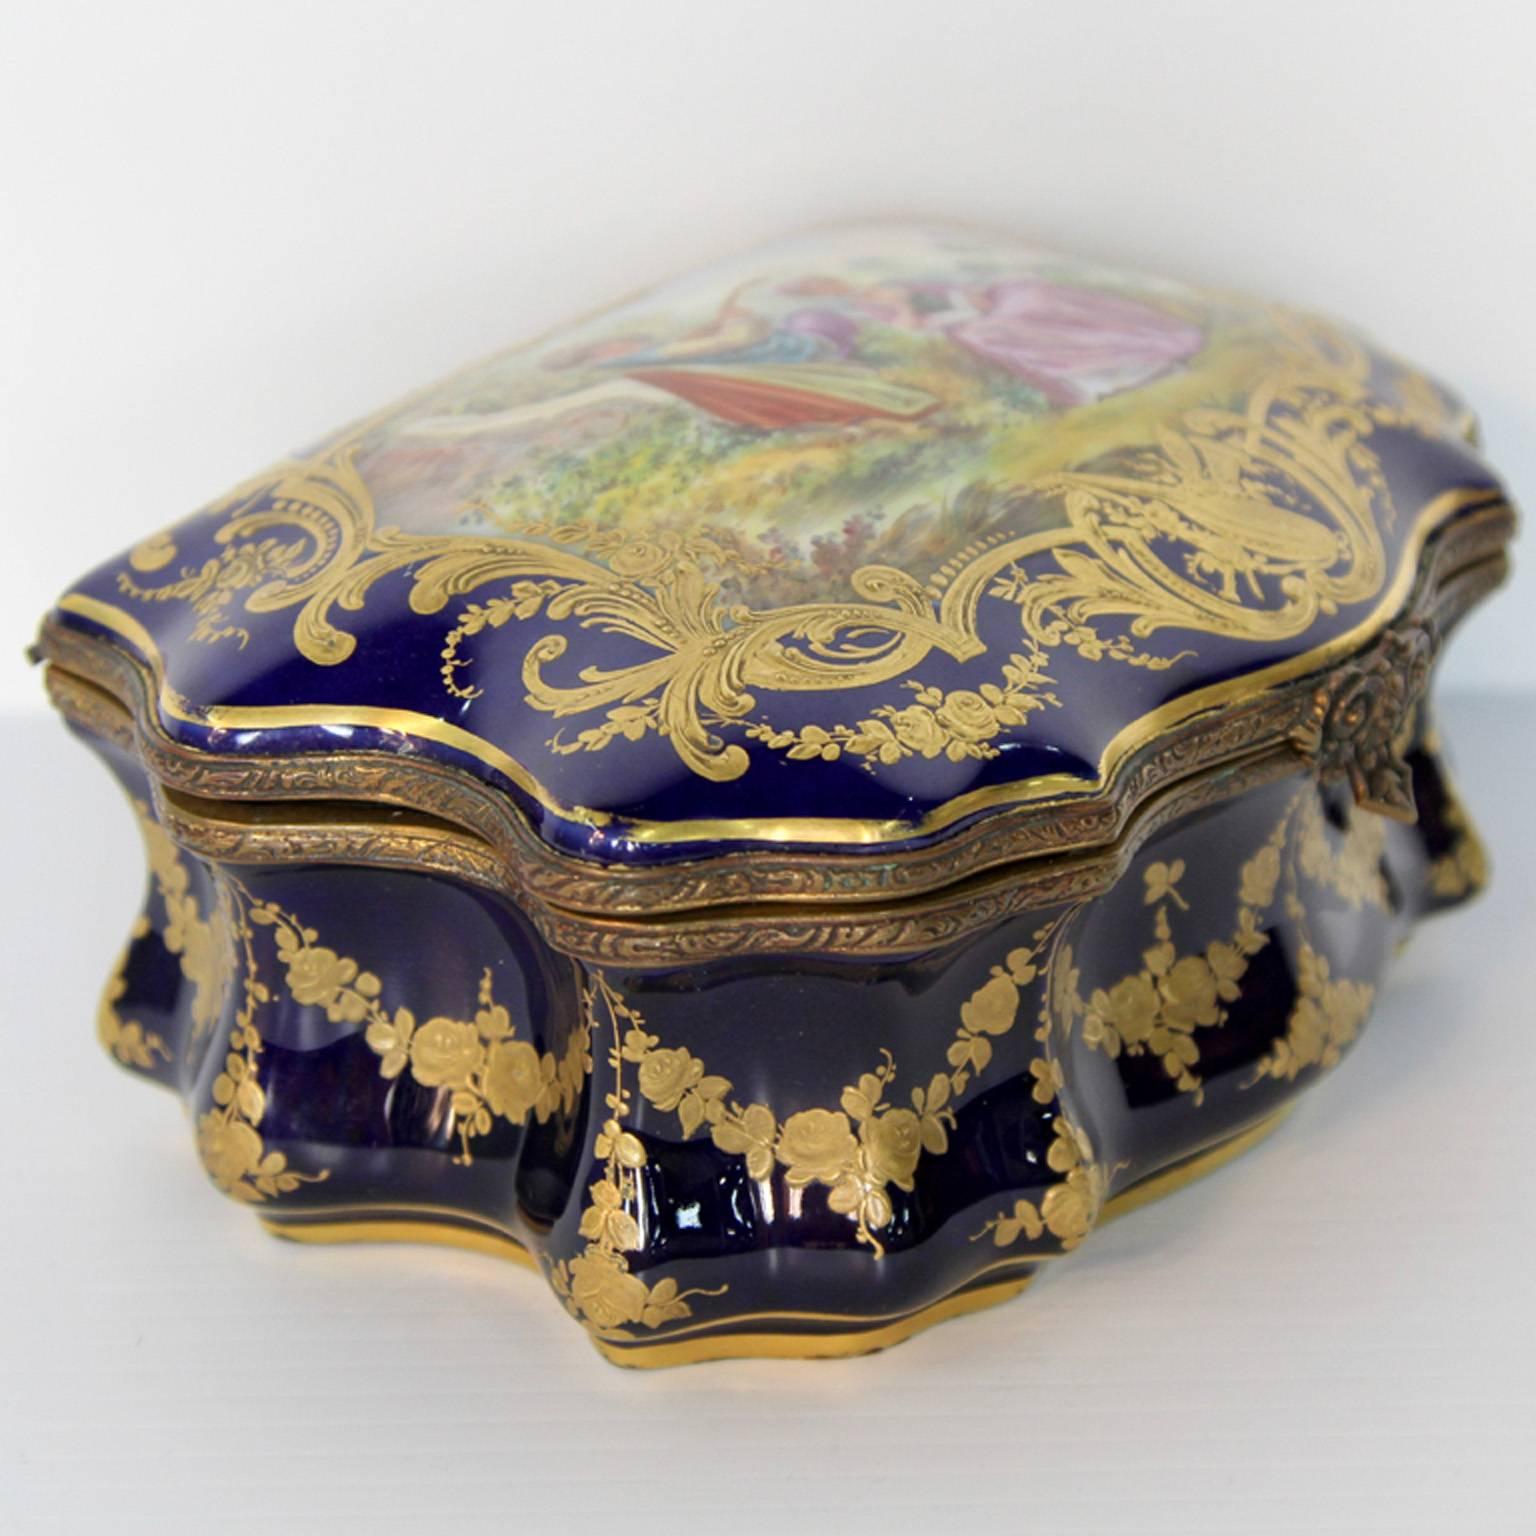 Bronze Antique Sevres Royal Imperial Cobalt Jewelry Box For Sale